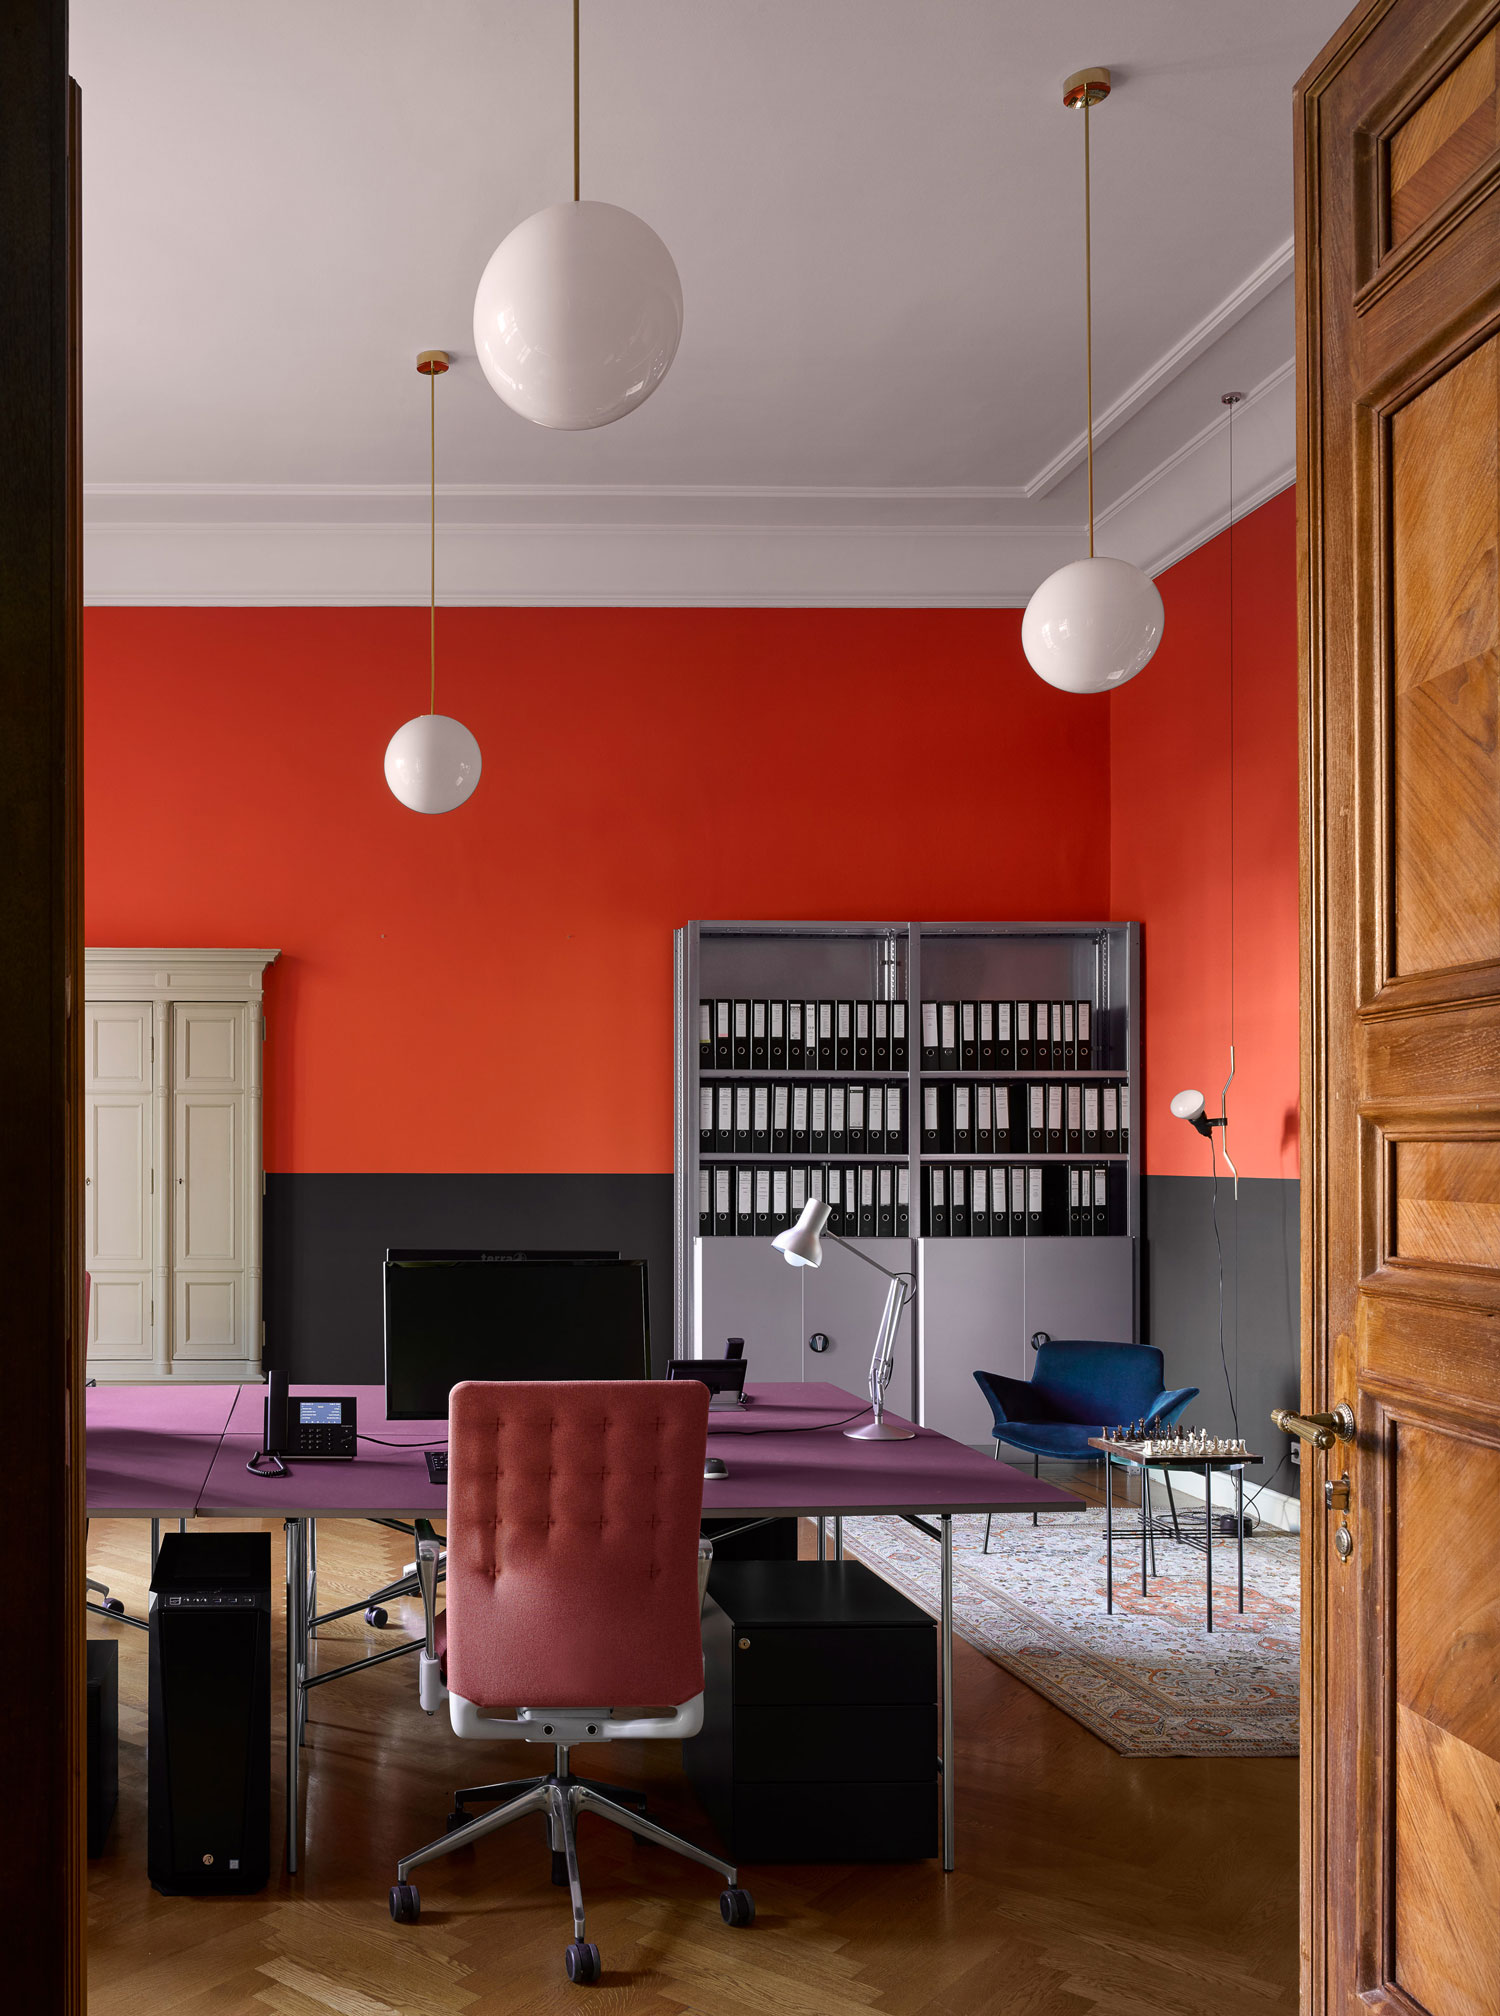 Grand C19th Palais in Berlin Reimagined as an Office by David Kohn Architects.-4